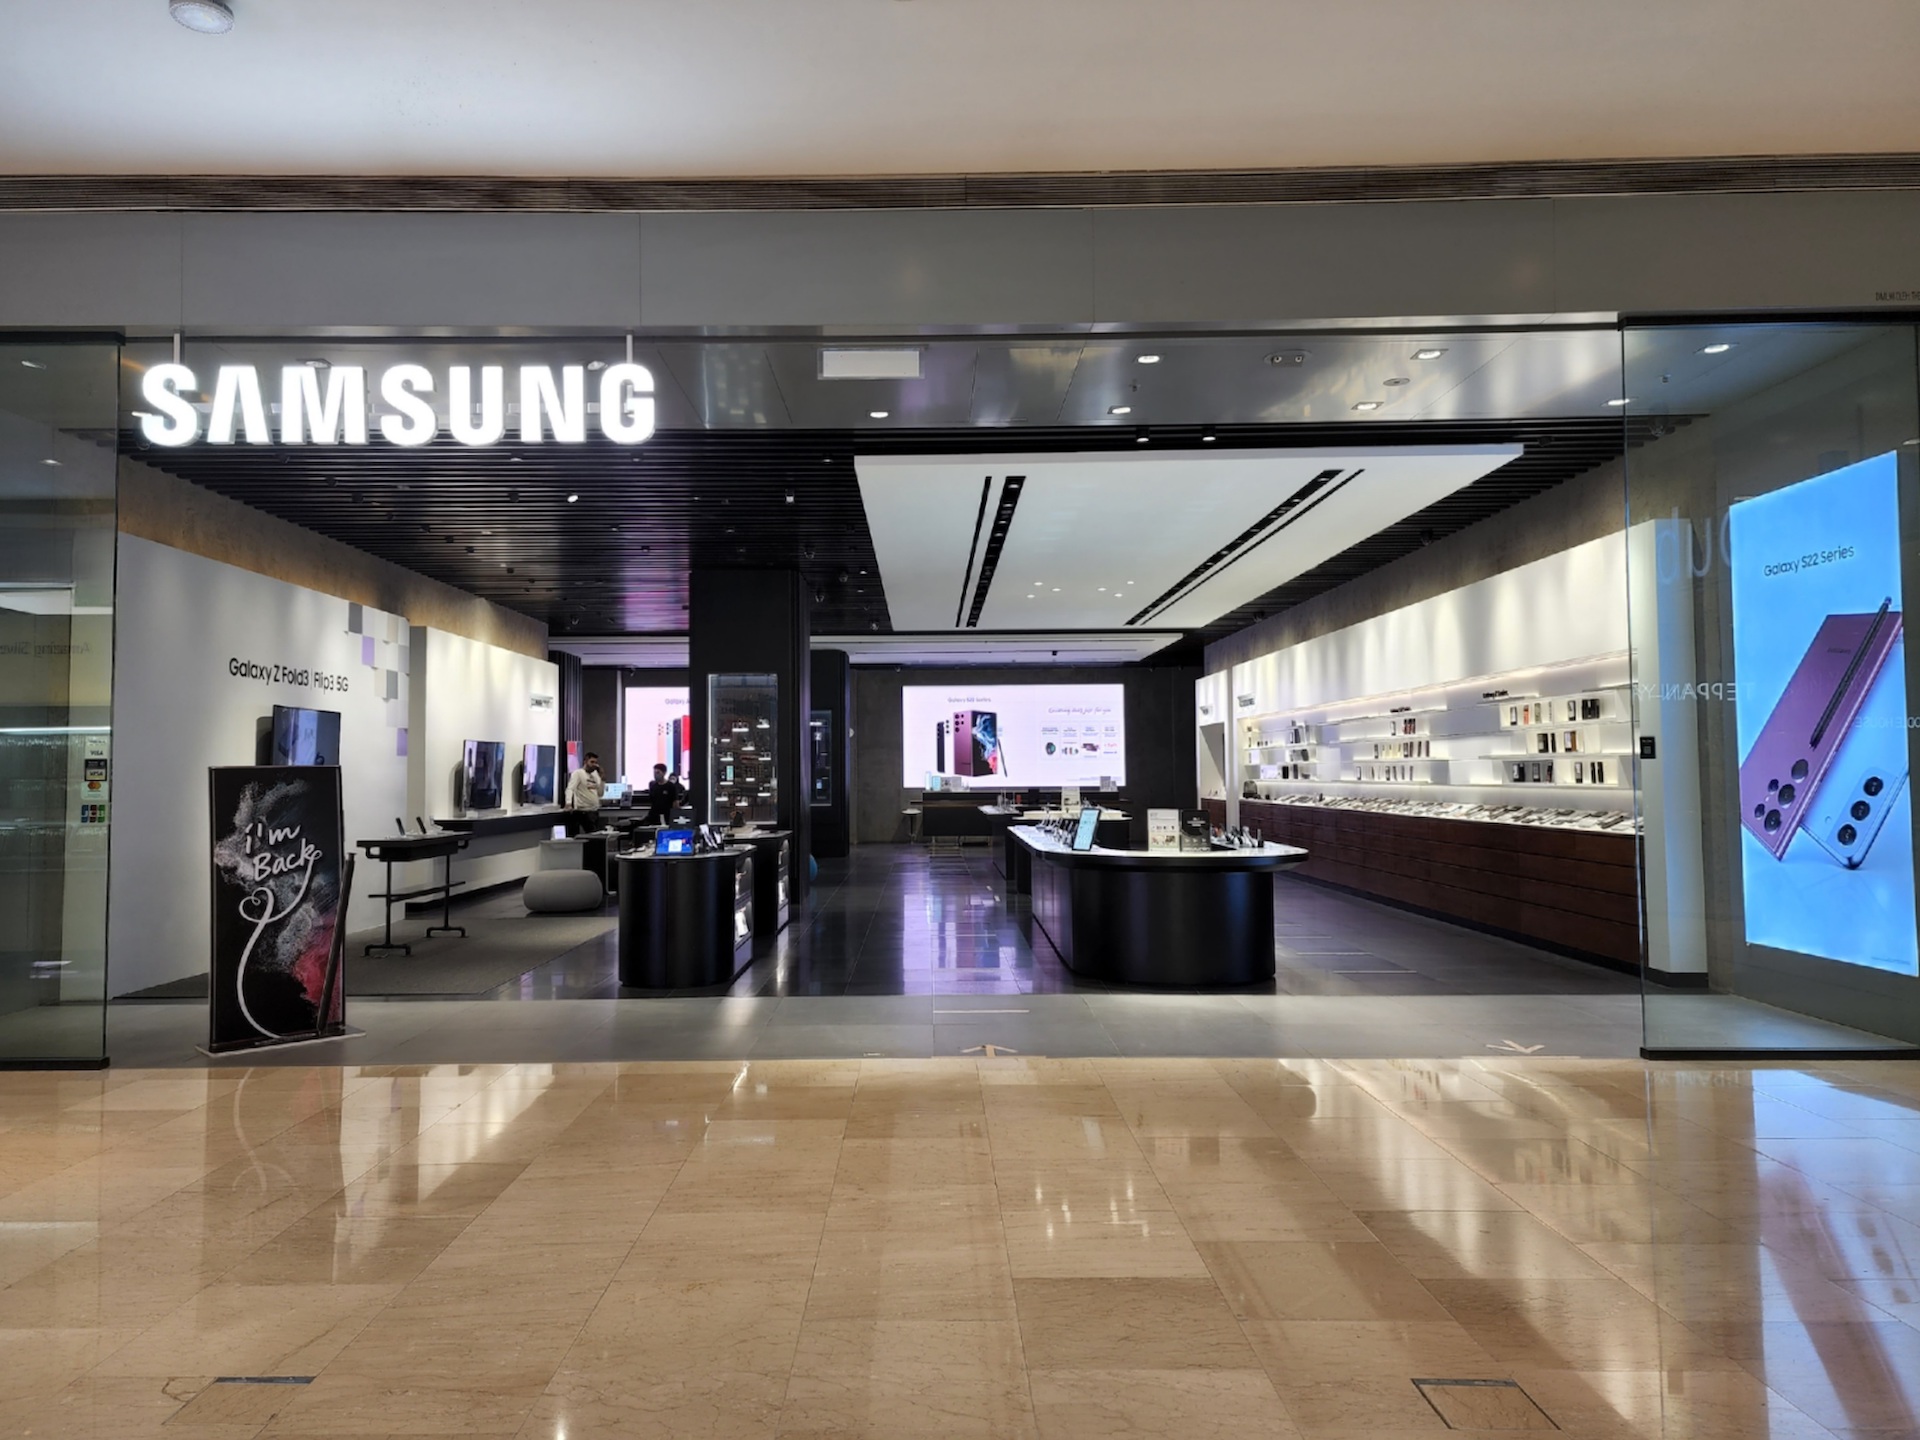  The image shows the interior of a Samsung Experience Lounge located in Jakarta, Indonesia.